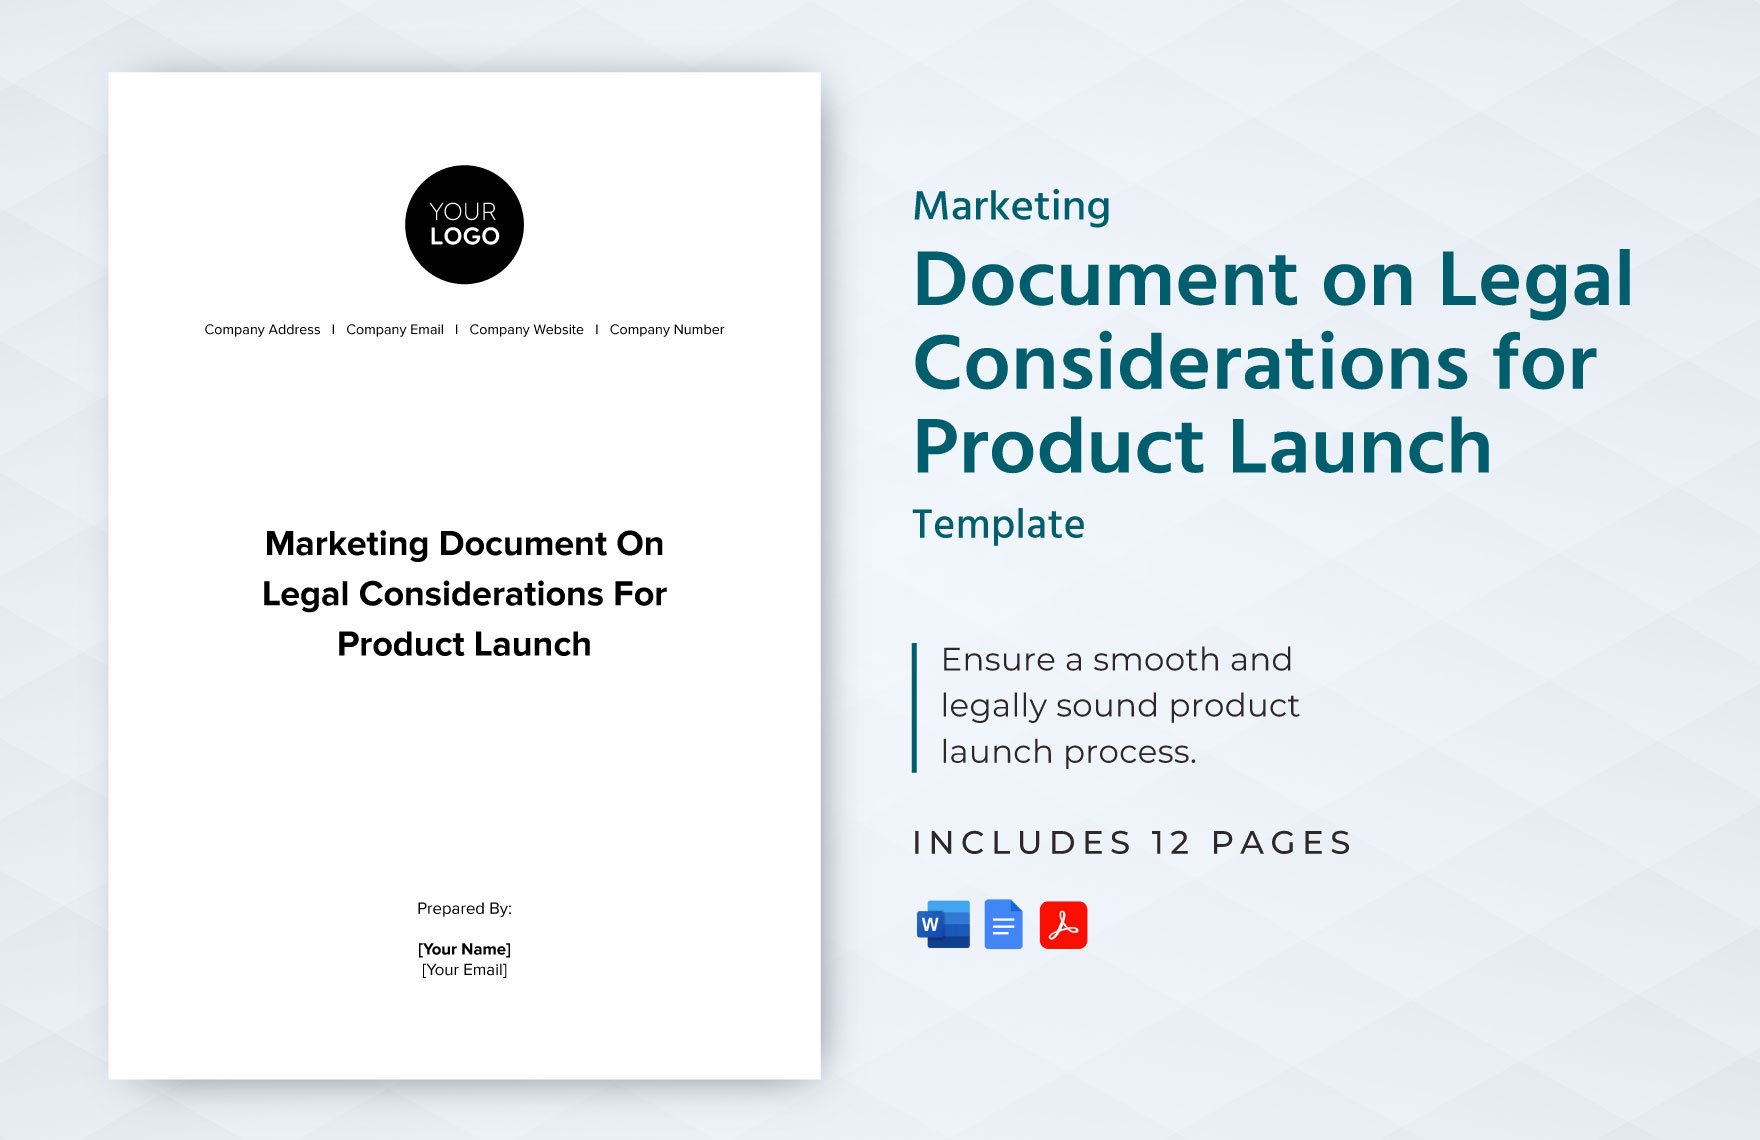 Marketing Document on Legal Considerations for Product Launch Template